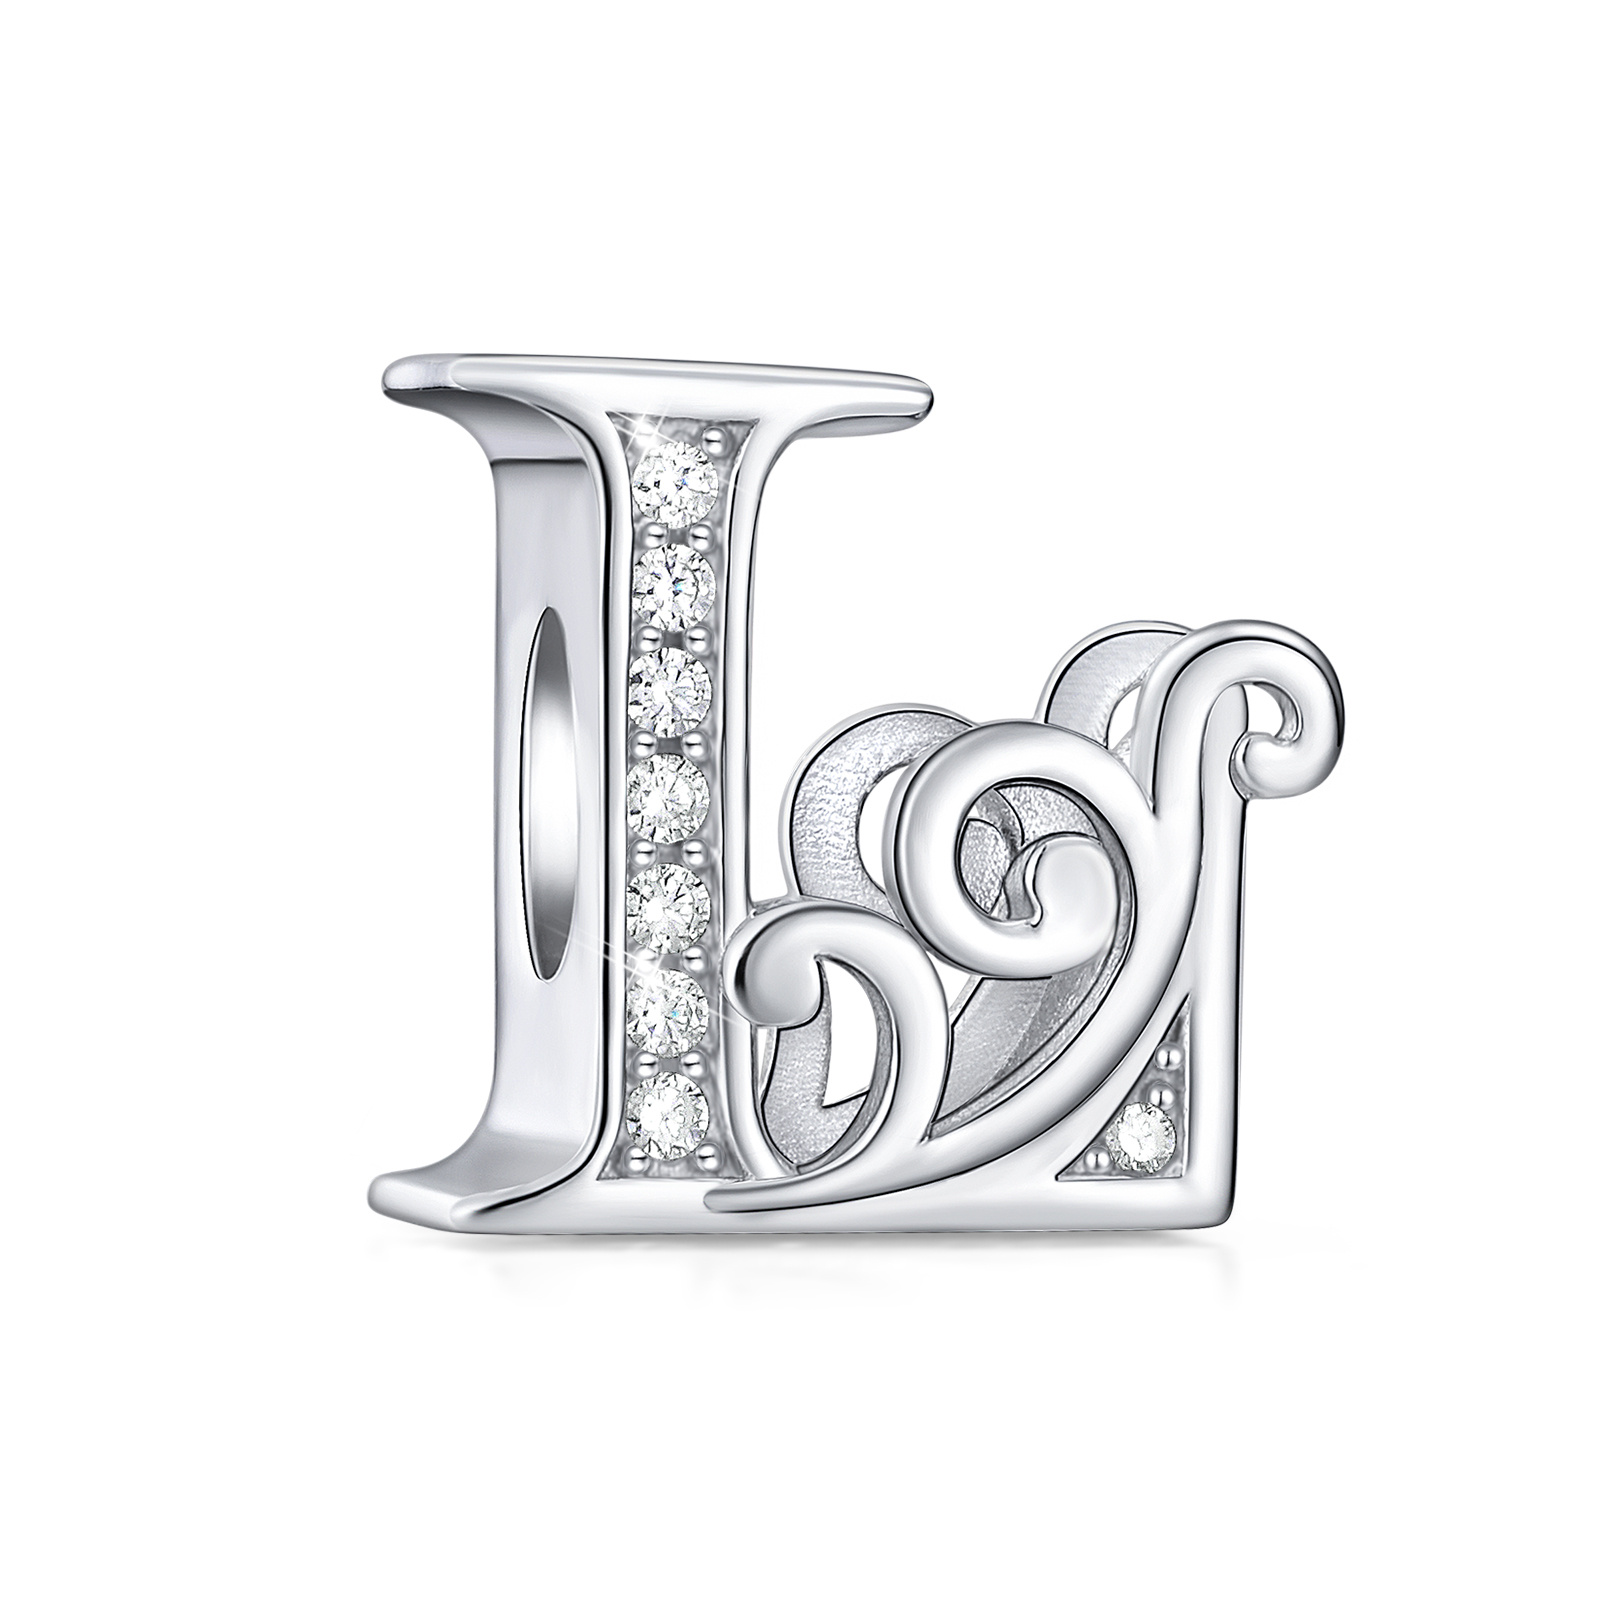 BABAMIA 925 Sterling Silver Heart Letter Bead Charms Fits Bracelets and Necklaces | Initial Pendant Charms Paved with Cubic Zirconia | Letter A-Z